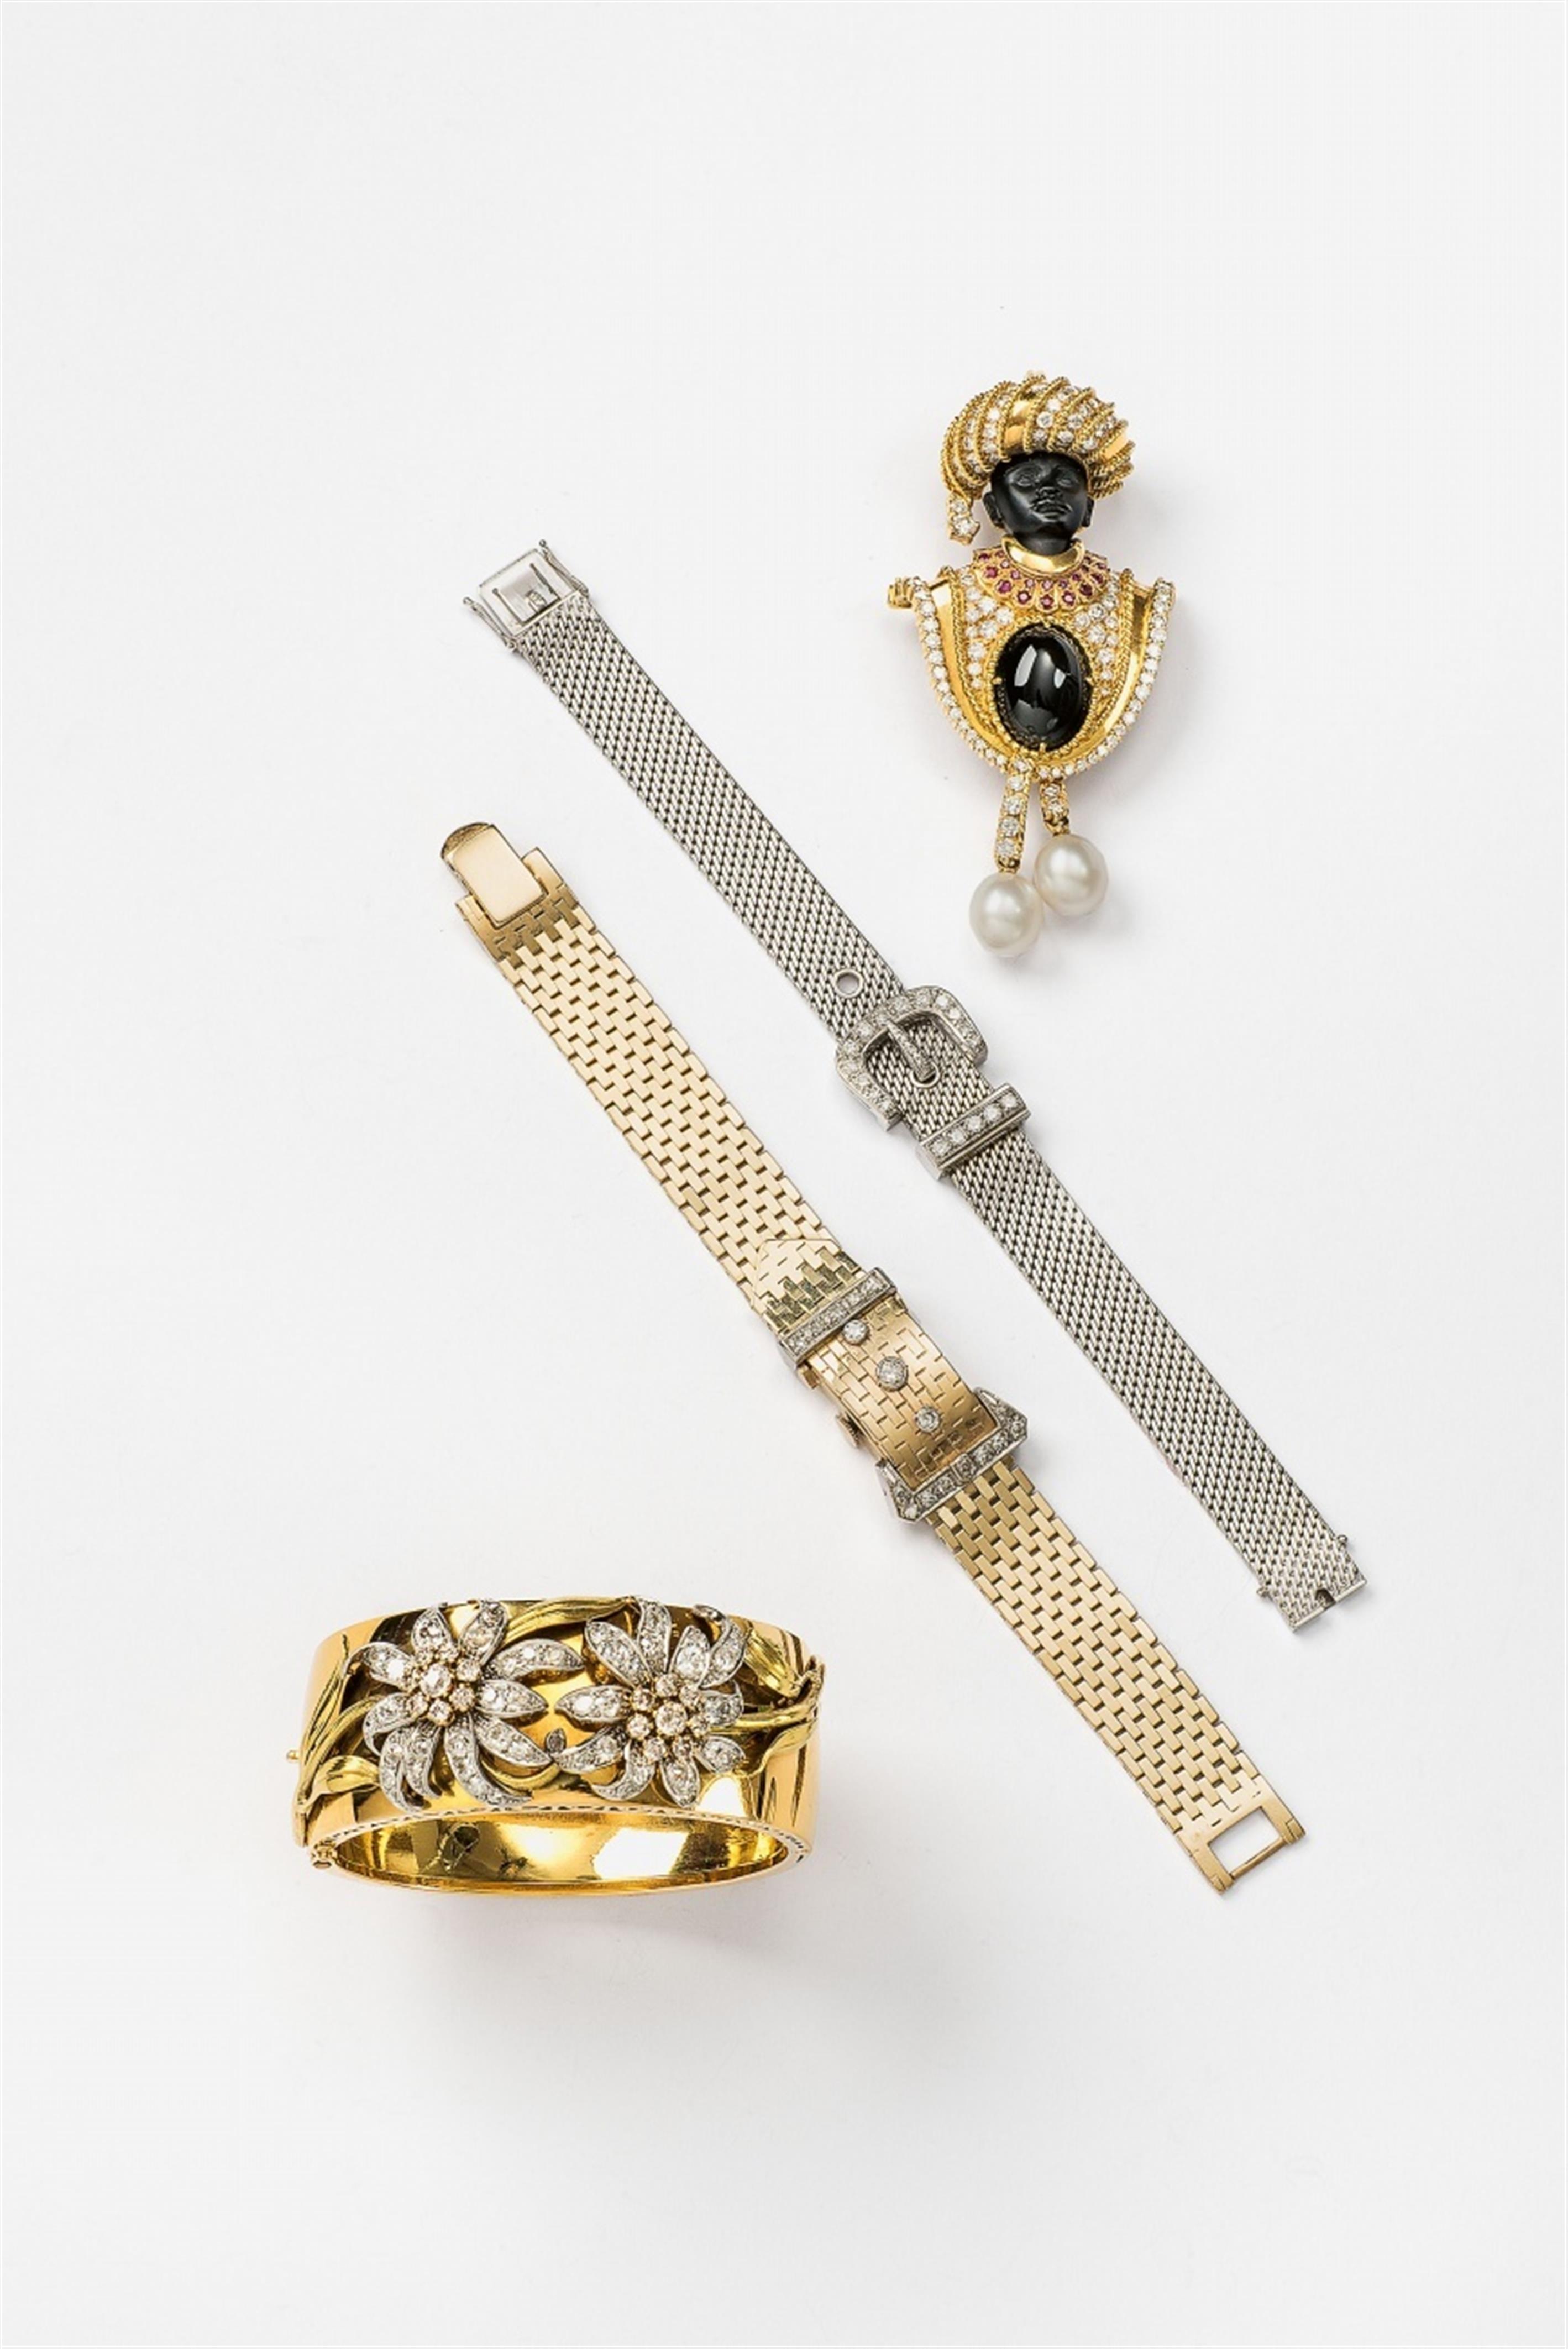 A 14k gold bracelet with a concealed watch - image-2